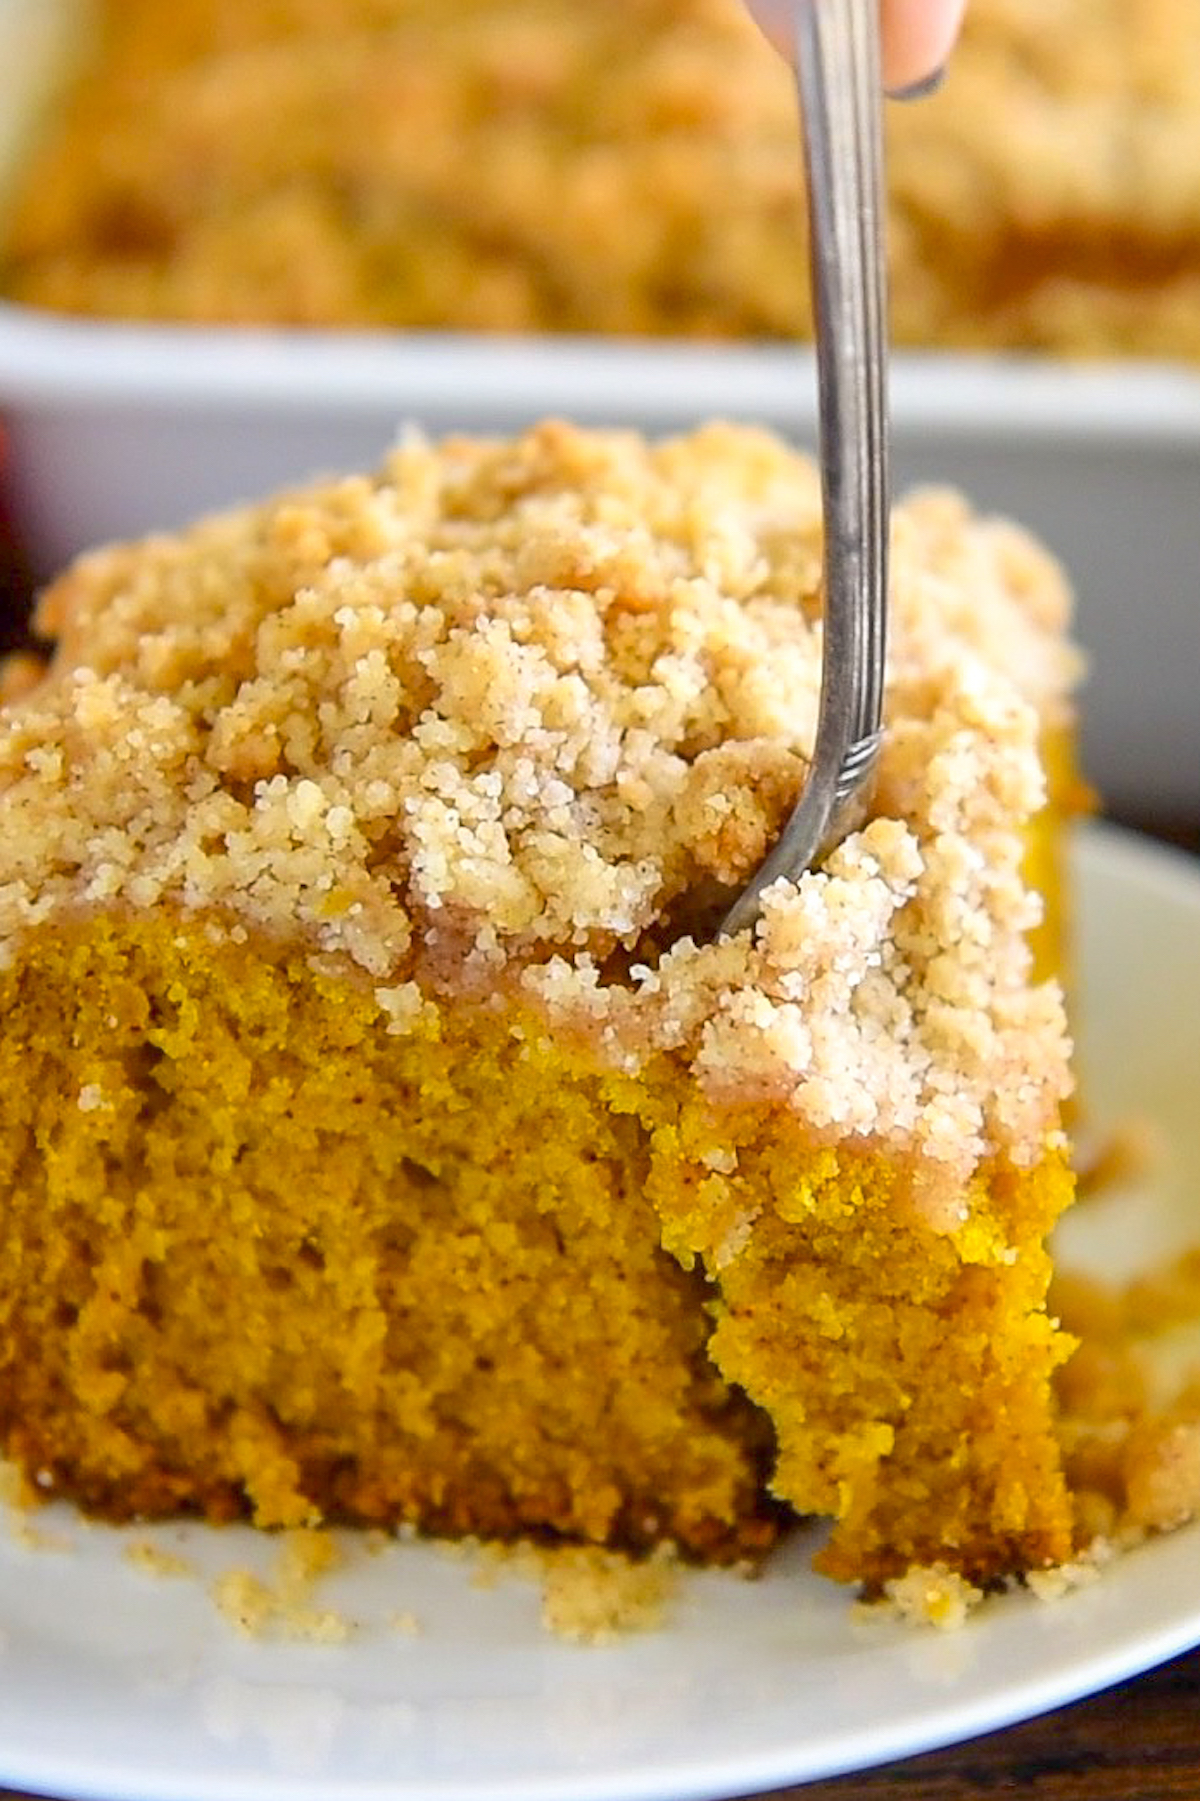 A slice of pumpkin coffee cake on a plate with a fork taking a bite.